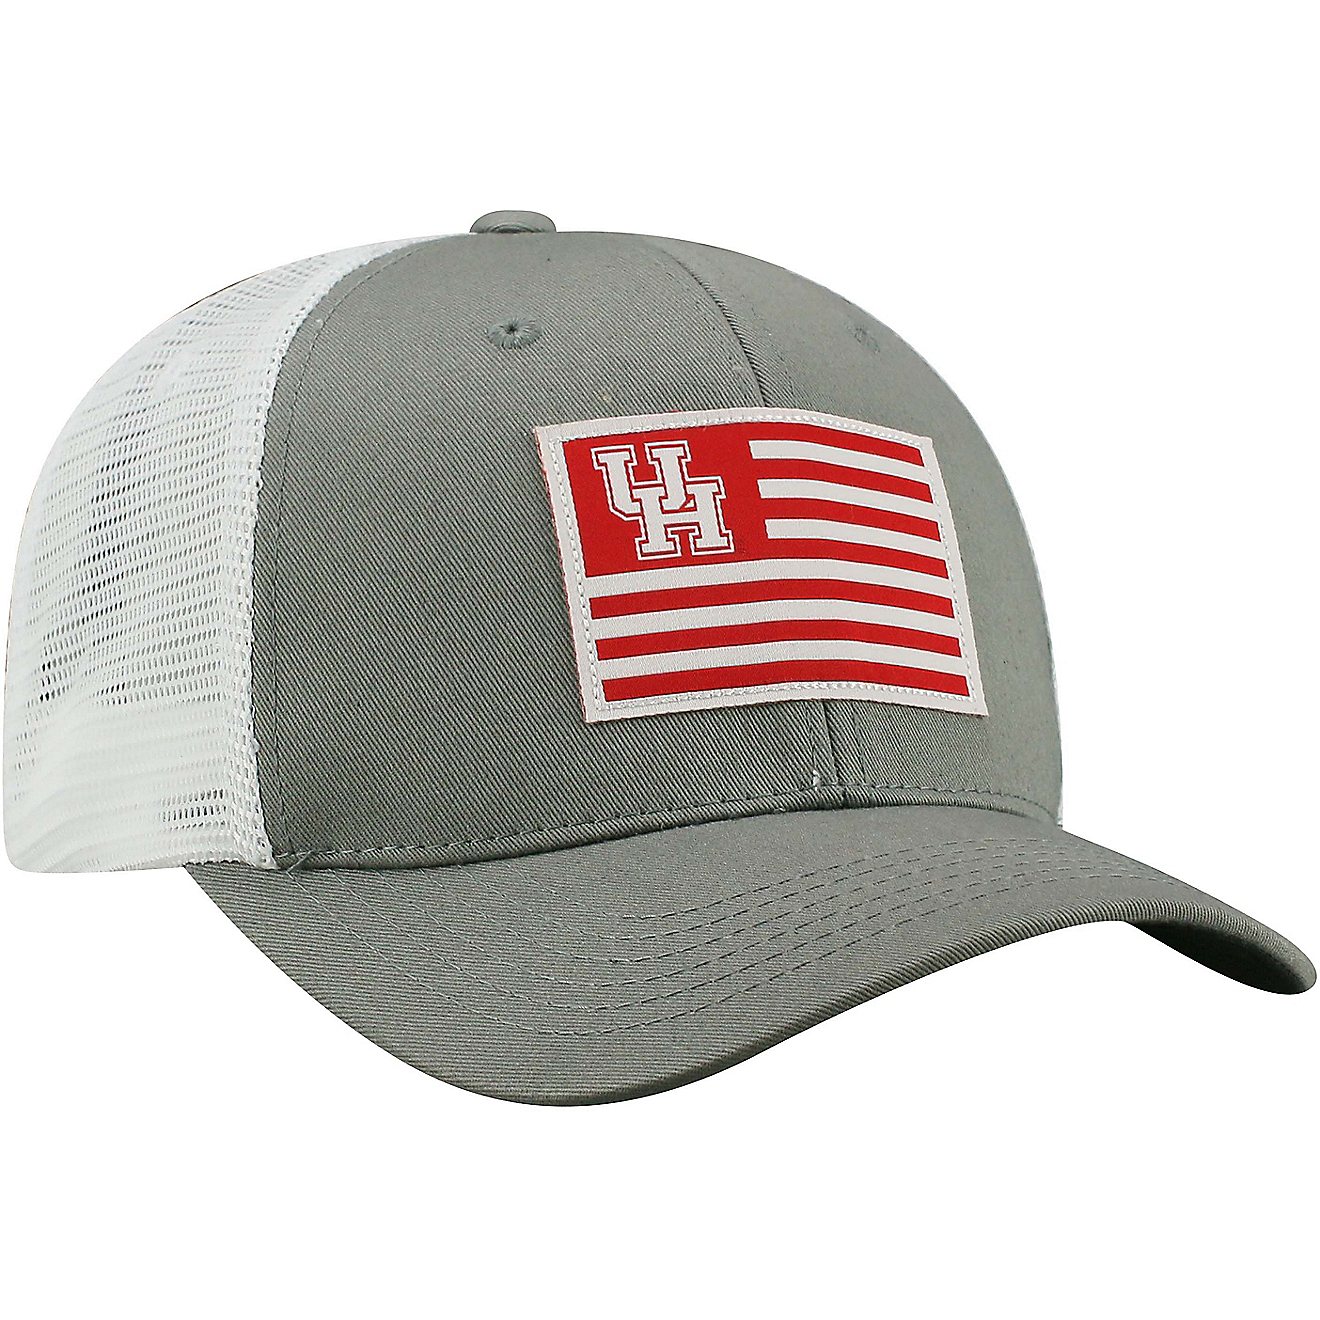 Top of the World Men's University of Houston Brave Snapback Cap                                                                  - view number 4